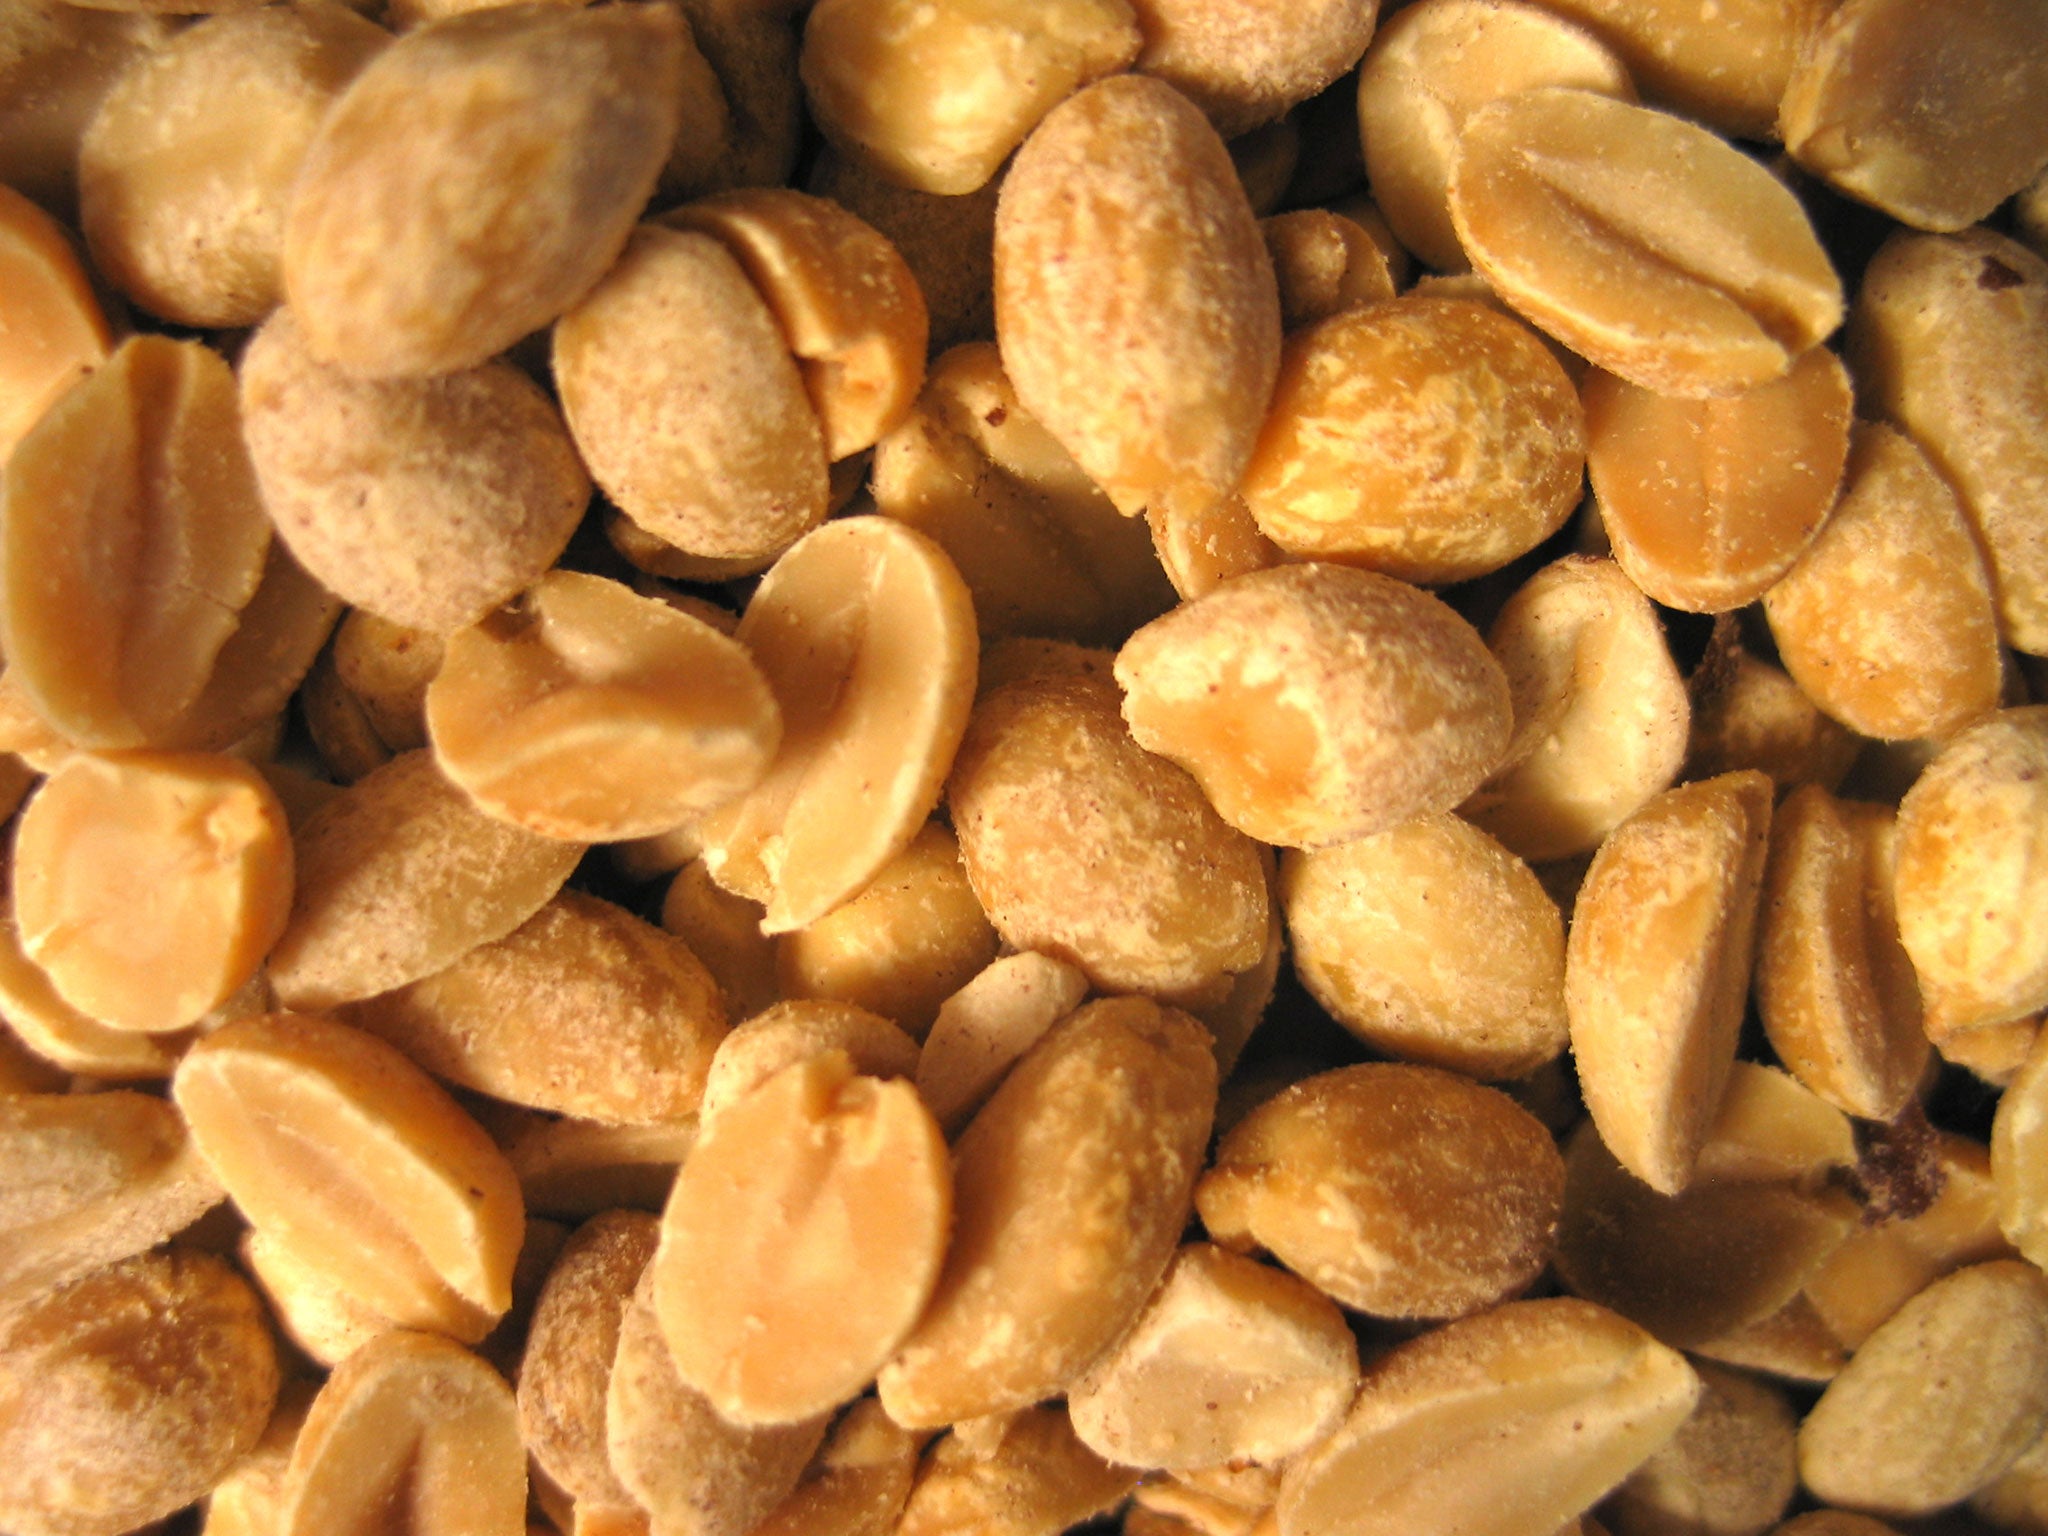 A study has shown that Dry-roasted peanuts may be more likely to trigger allergic reactions than those that are 'raw'